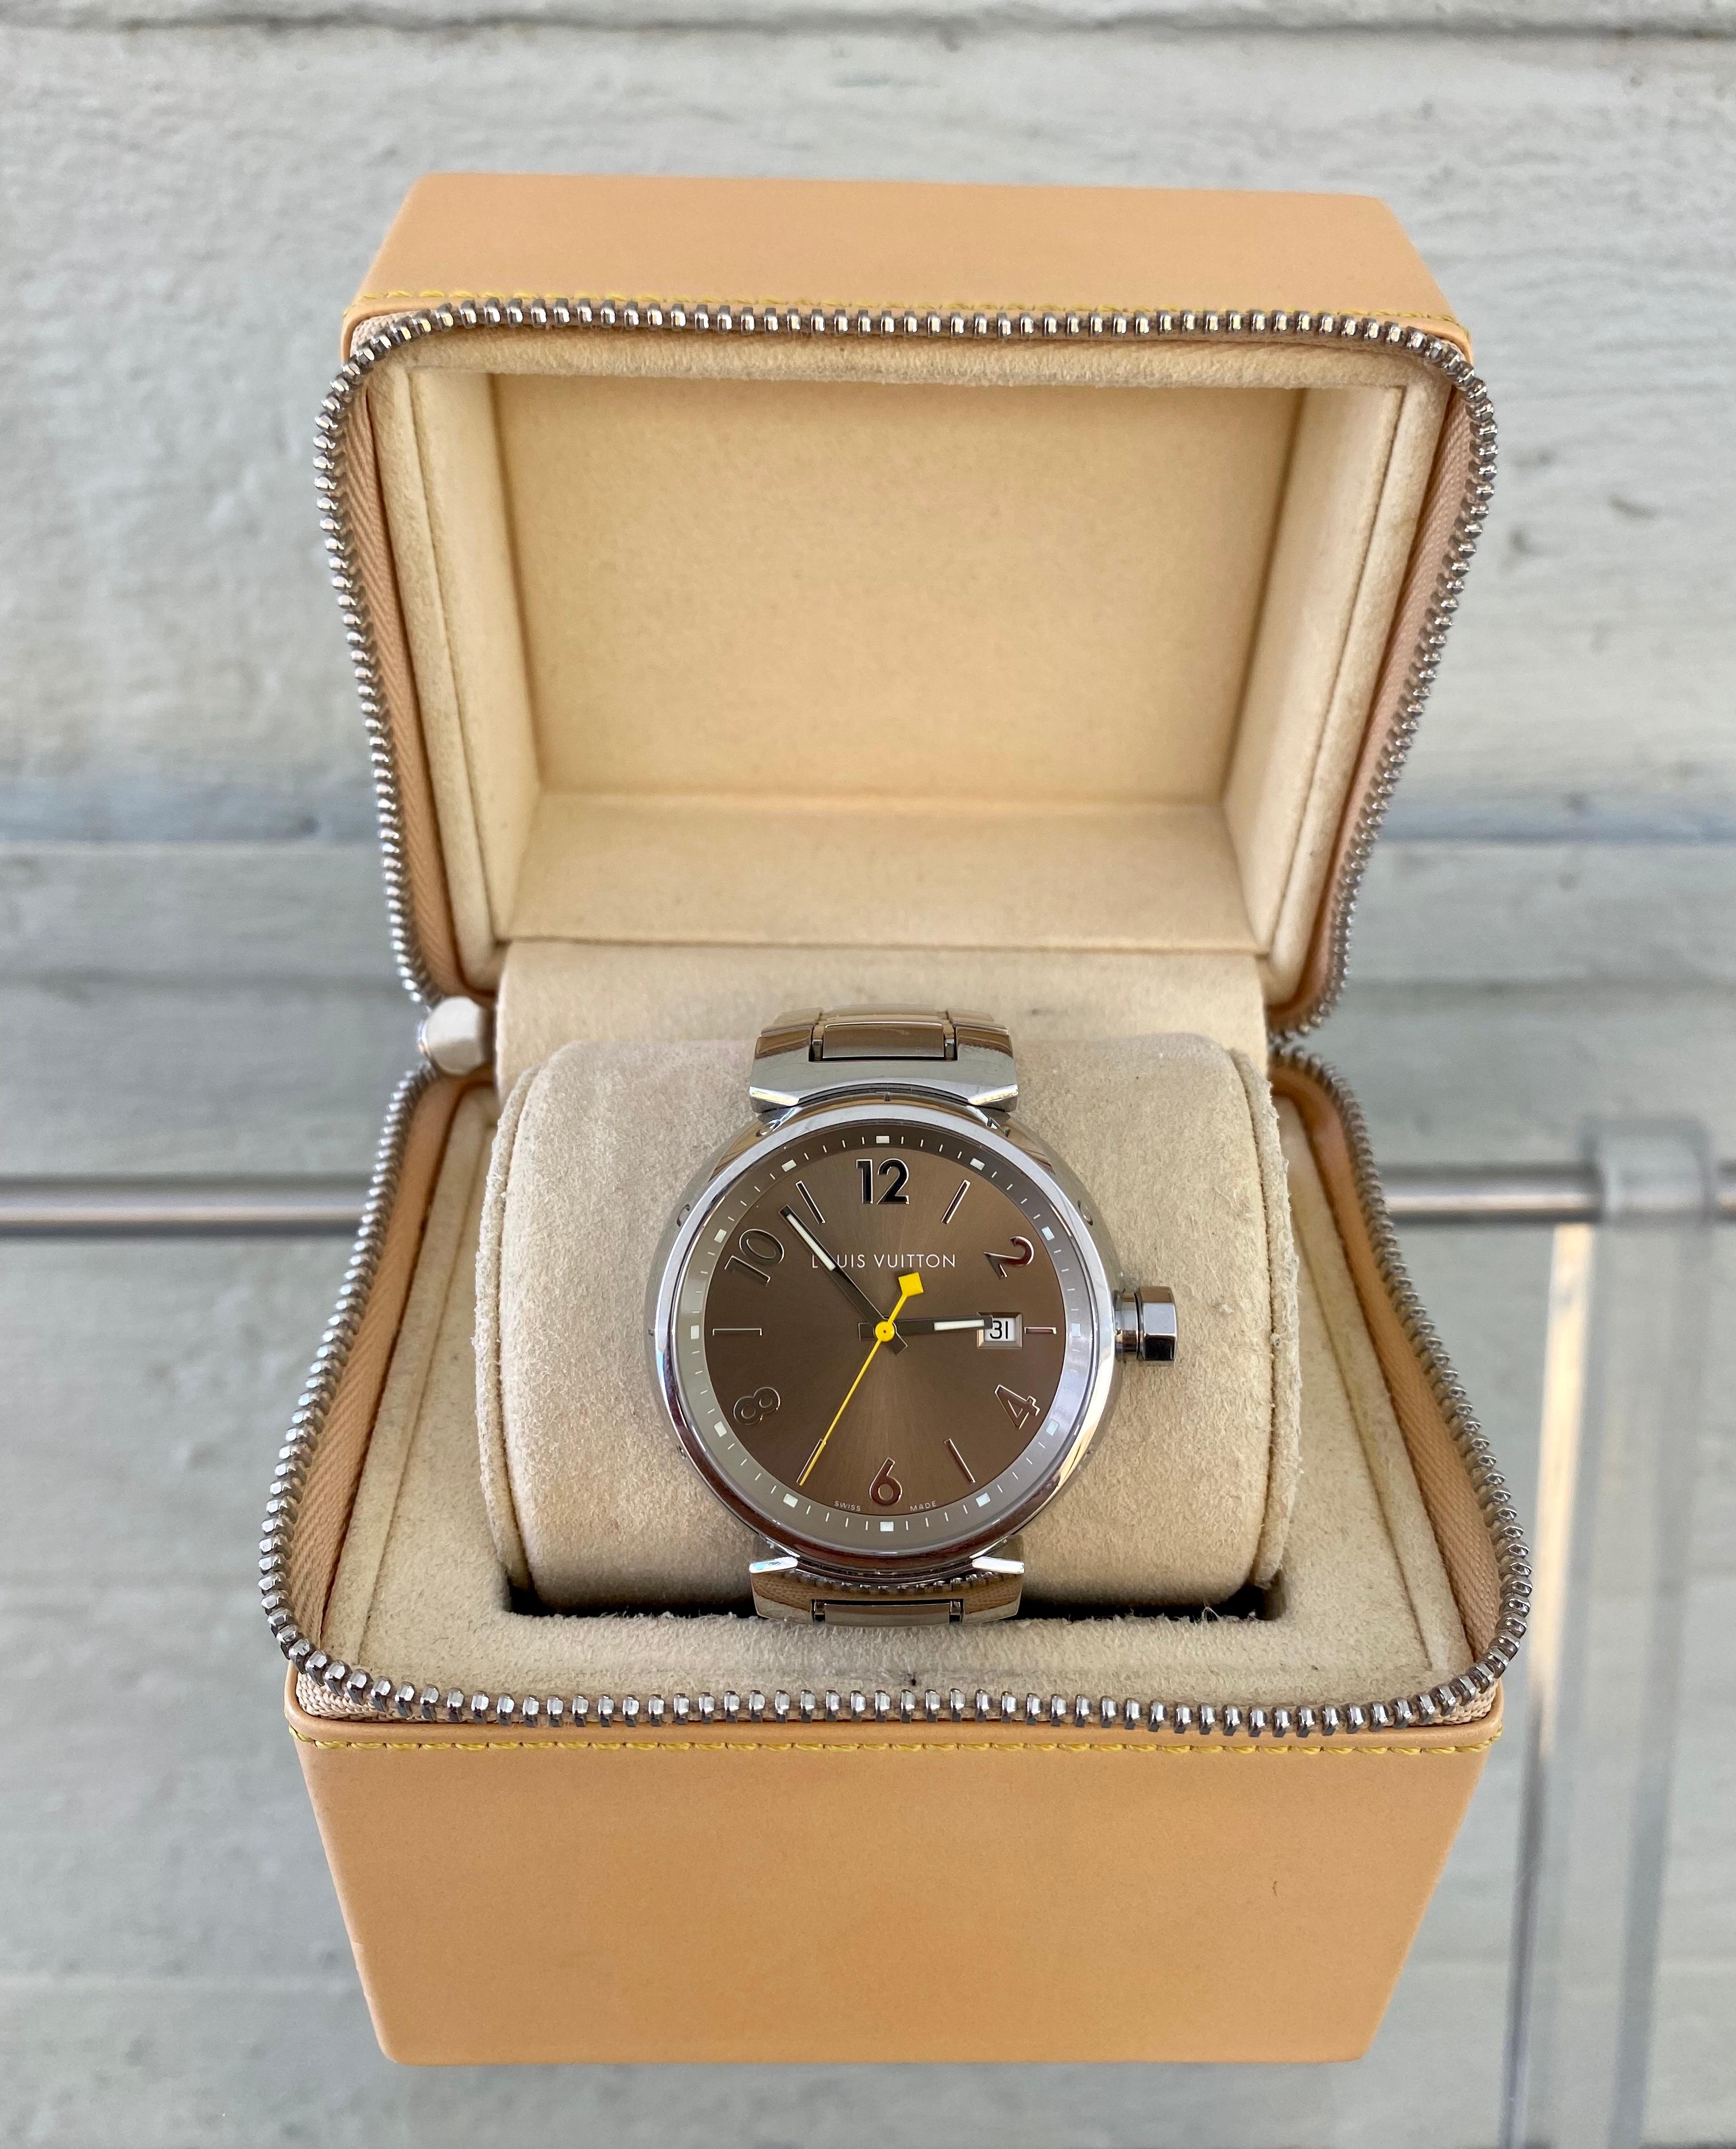 Louis Vuitton 100m Swiss - For Sale on 1stDibs  louis vuitton 100m swiss  made stainless steel price, reloj louis vuitton 100m swiss made stainless  steel